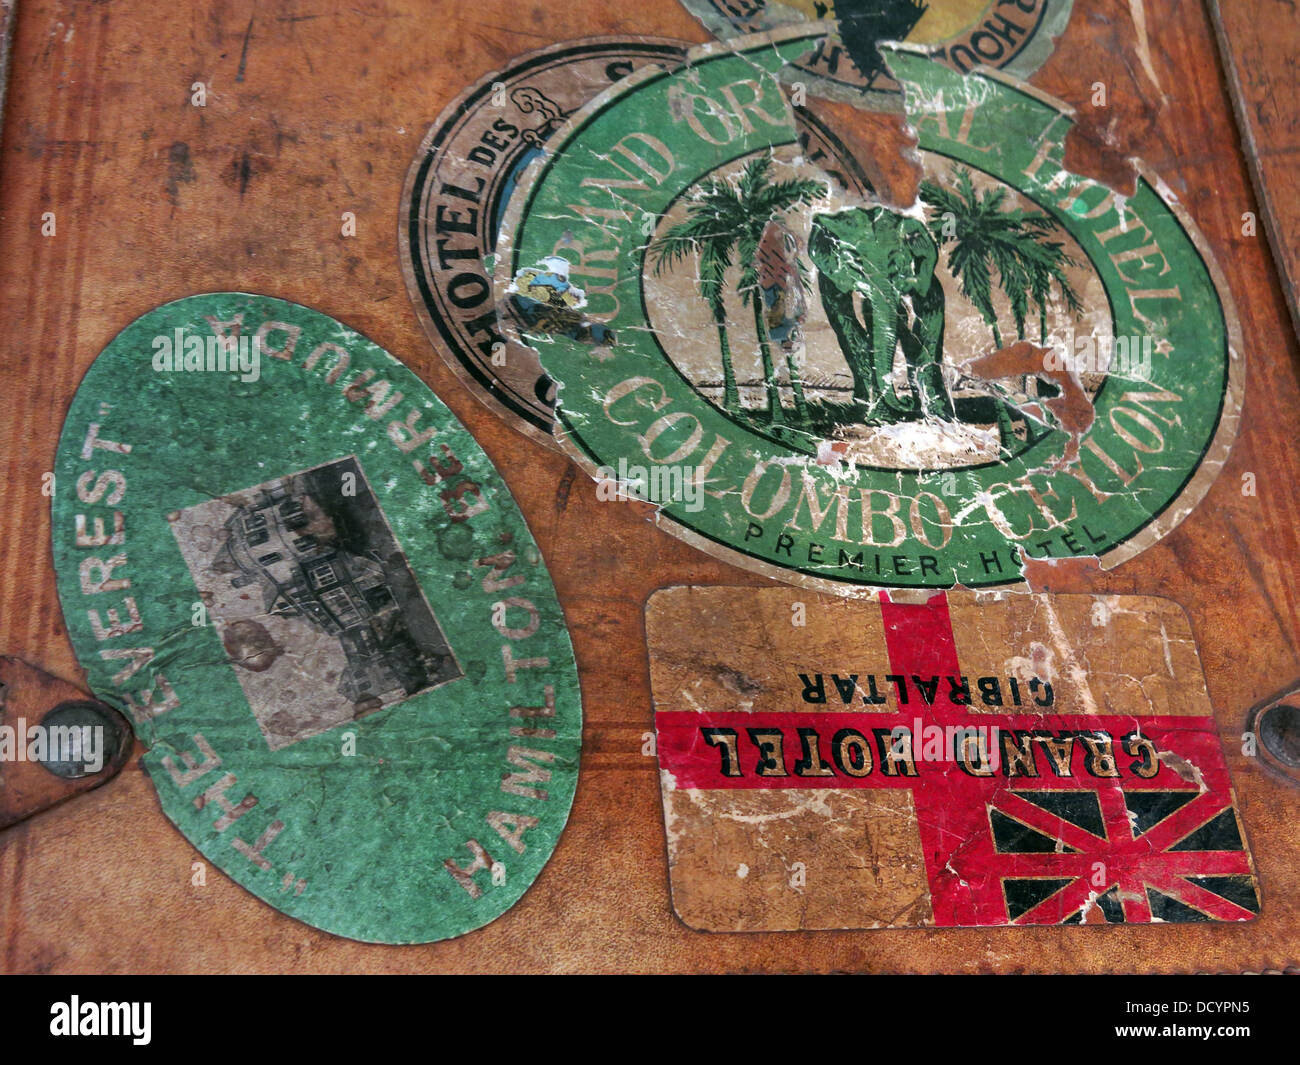 Grand Oriental Hotel, Columbo,Ceylon,Luggage and old luggage labels, cases boxes Stock Photo